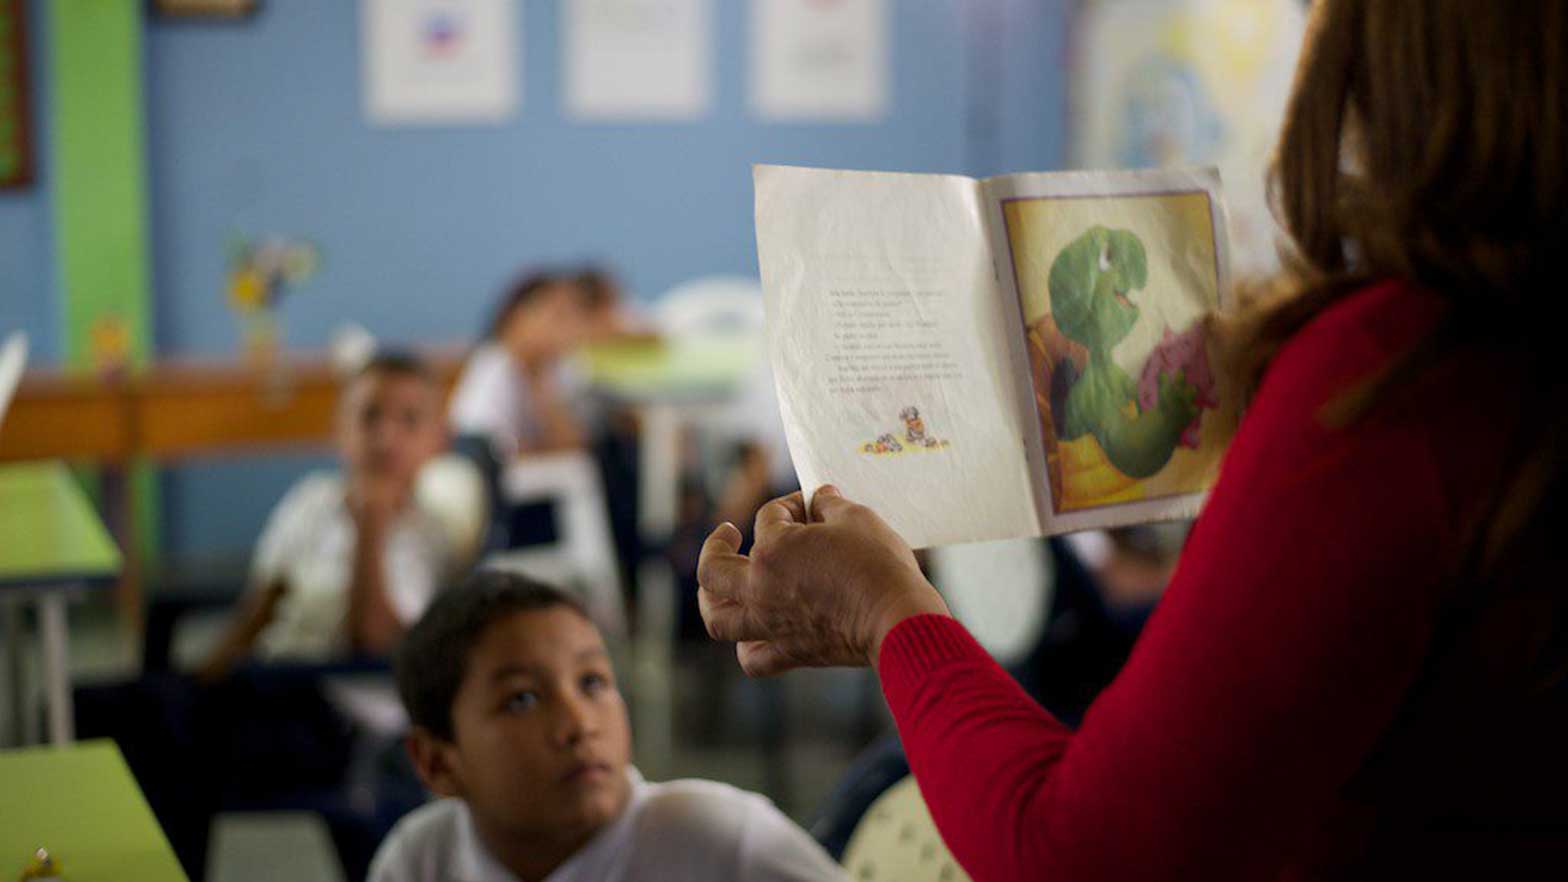 Chevron’s flagship educational program in Venezuela Aula20 was developed in remote and vulnerable areas of the country. Children and teachers at the U.E Padre Salinero Fe y Alegria school in rural Eastern Venezuela, are pictured in this file photo.